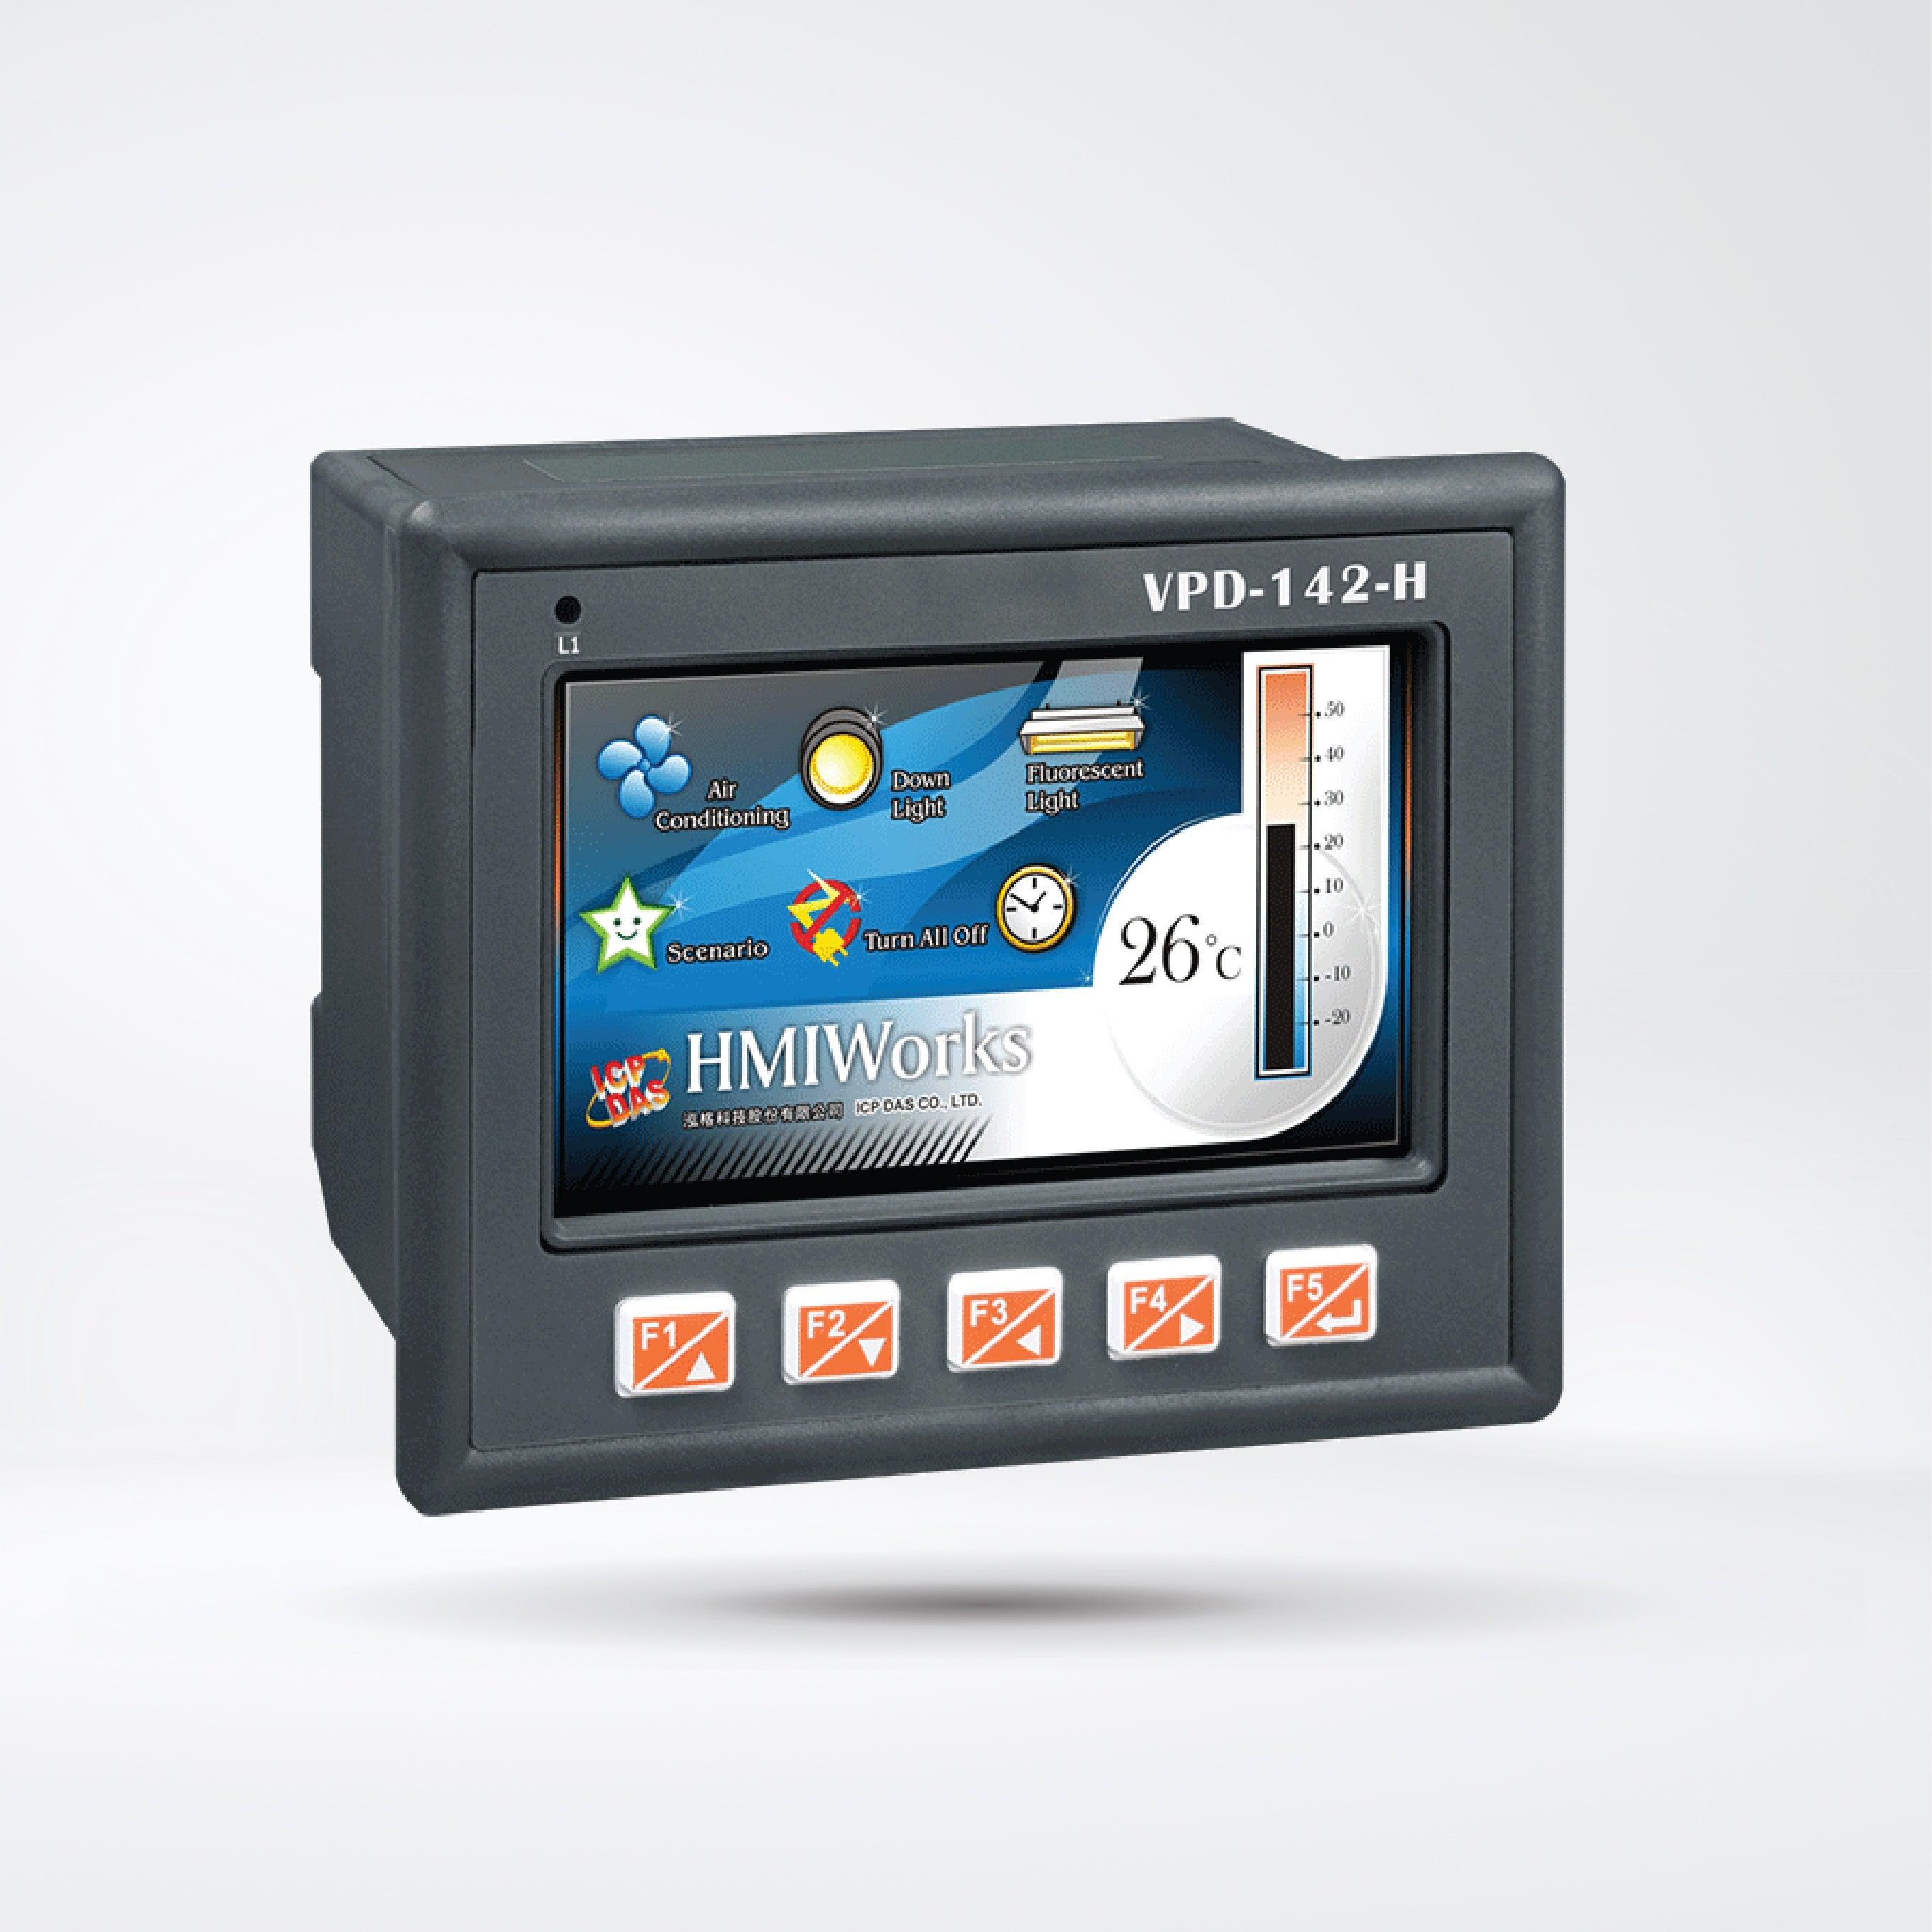 VPD-142-H 4.3" Touch HMI Device with 2 x RS-232/RS-485 and Rubber Keypad - Riverplus